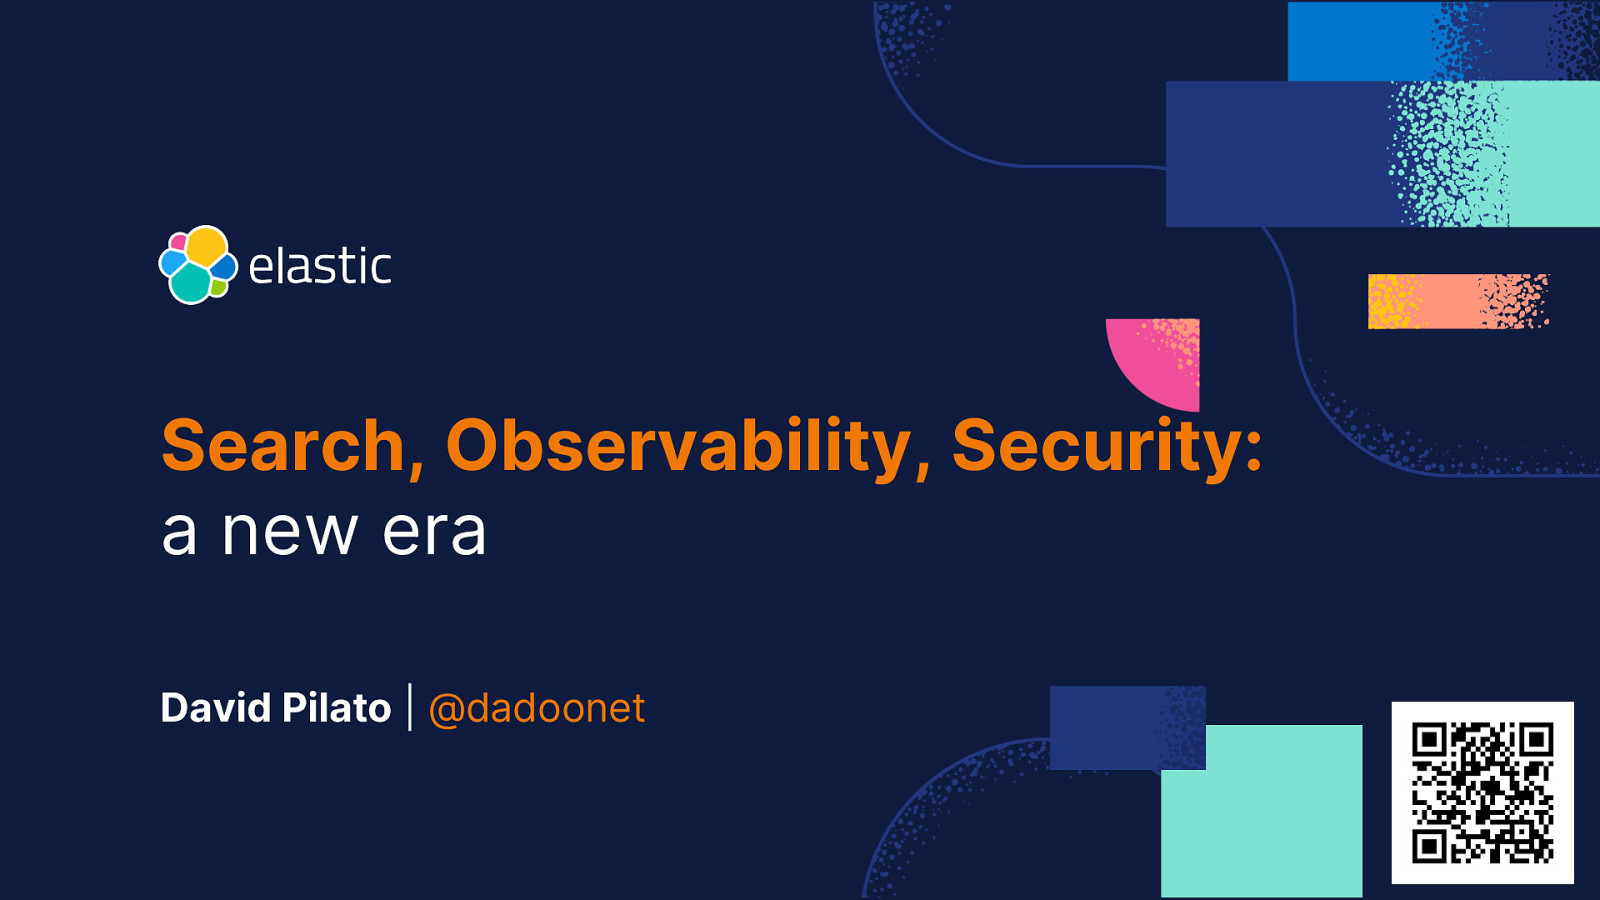 Search, Observability, Security: a new era